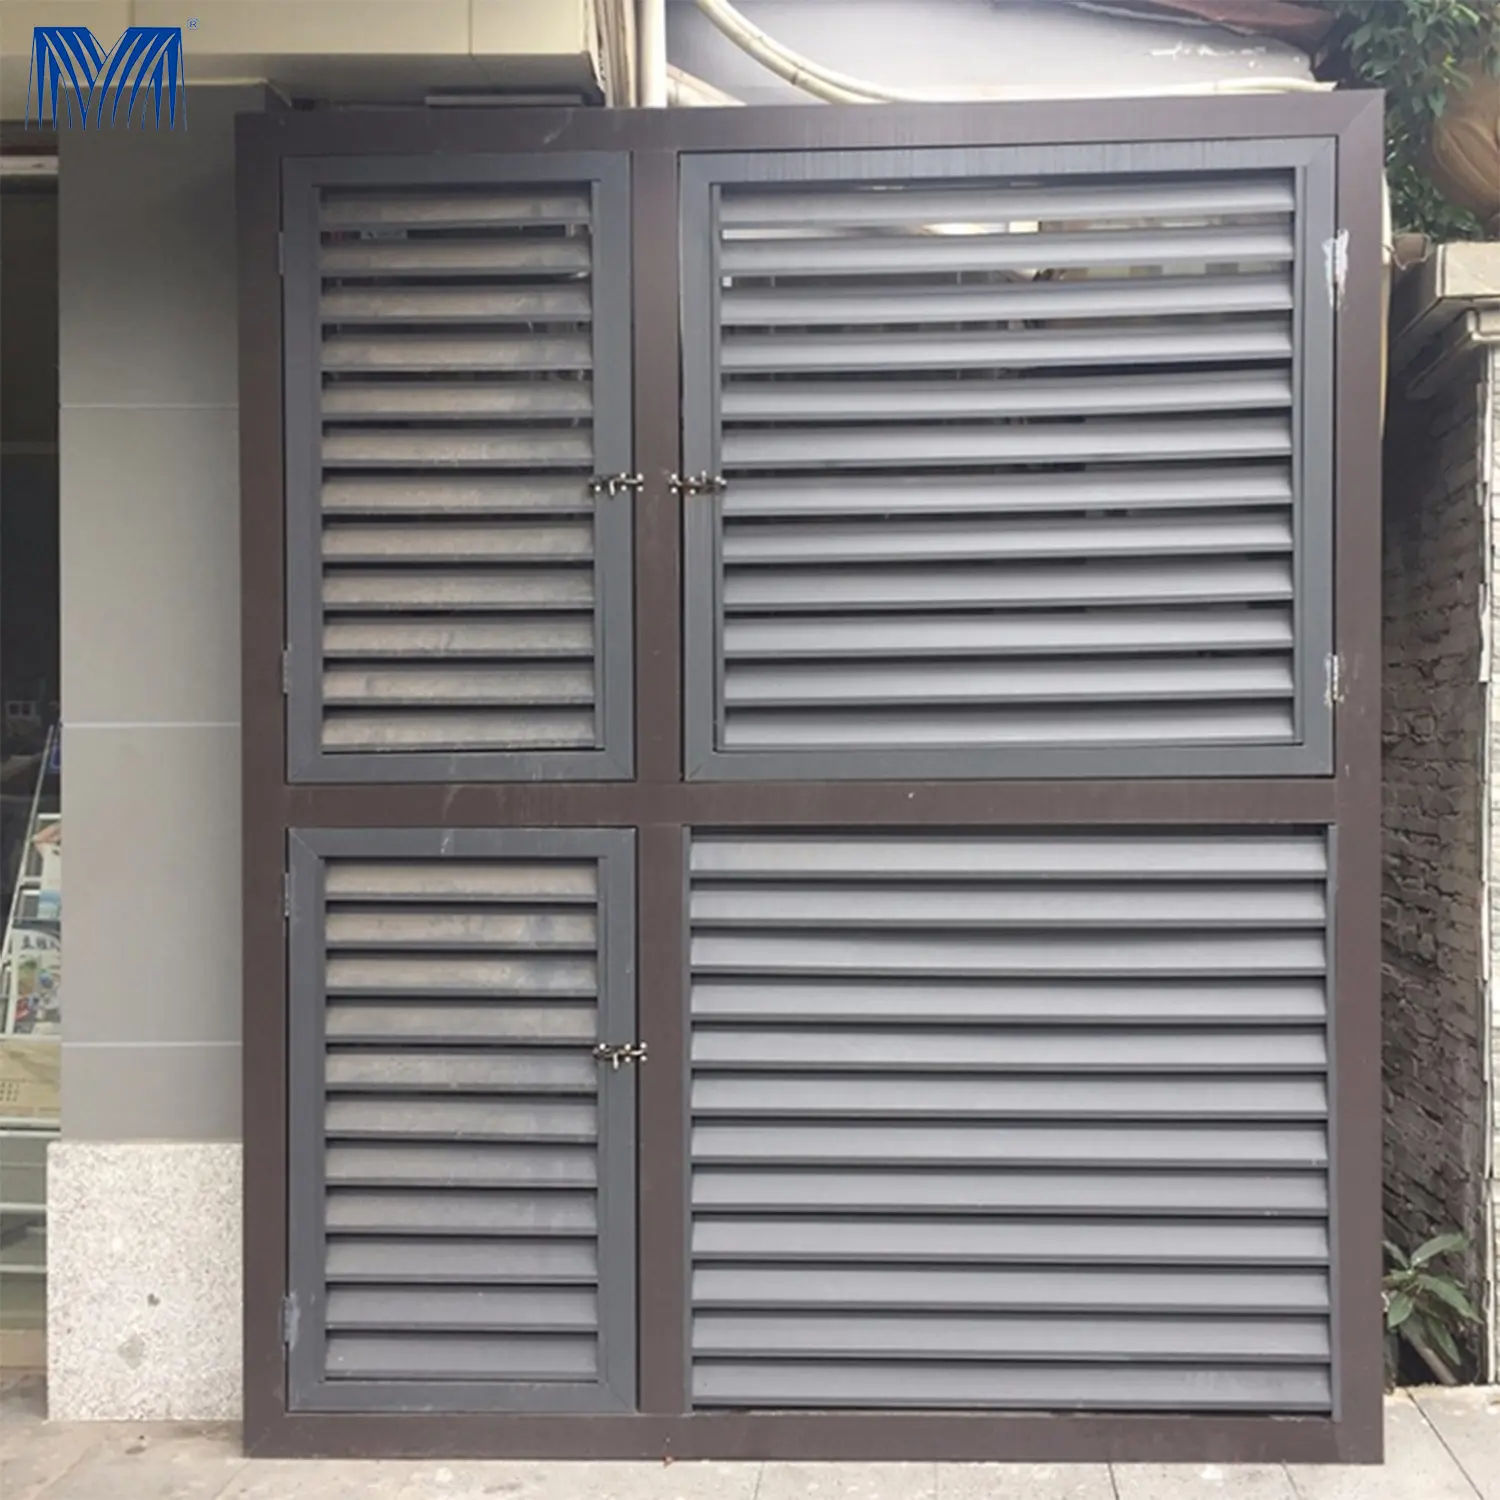 Outdoor fence panels vent air conditioning gate designs metal wall mini louver window aluminum shutter exterior storm protection